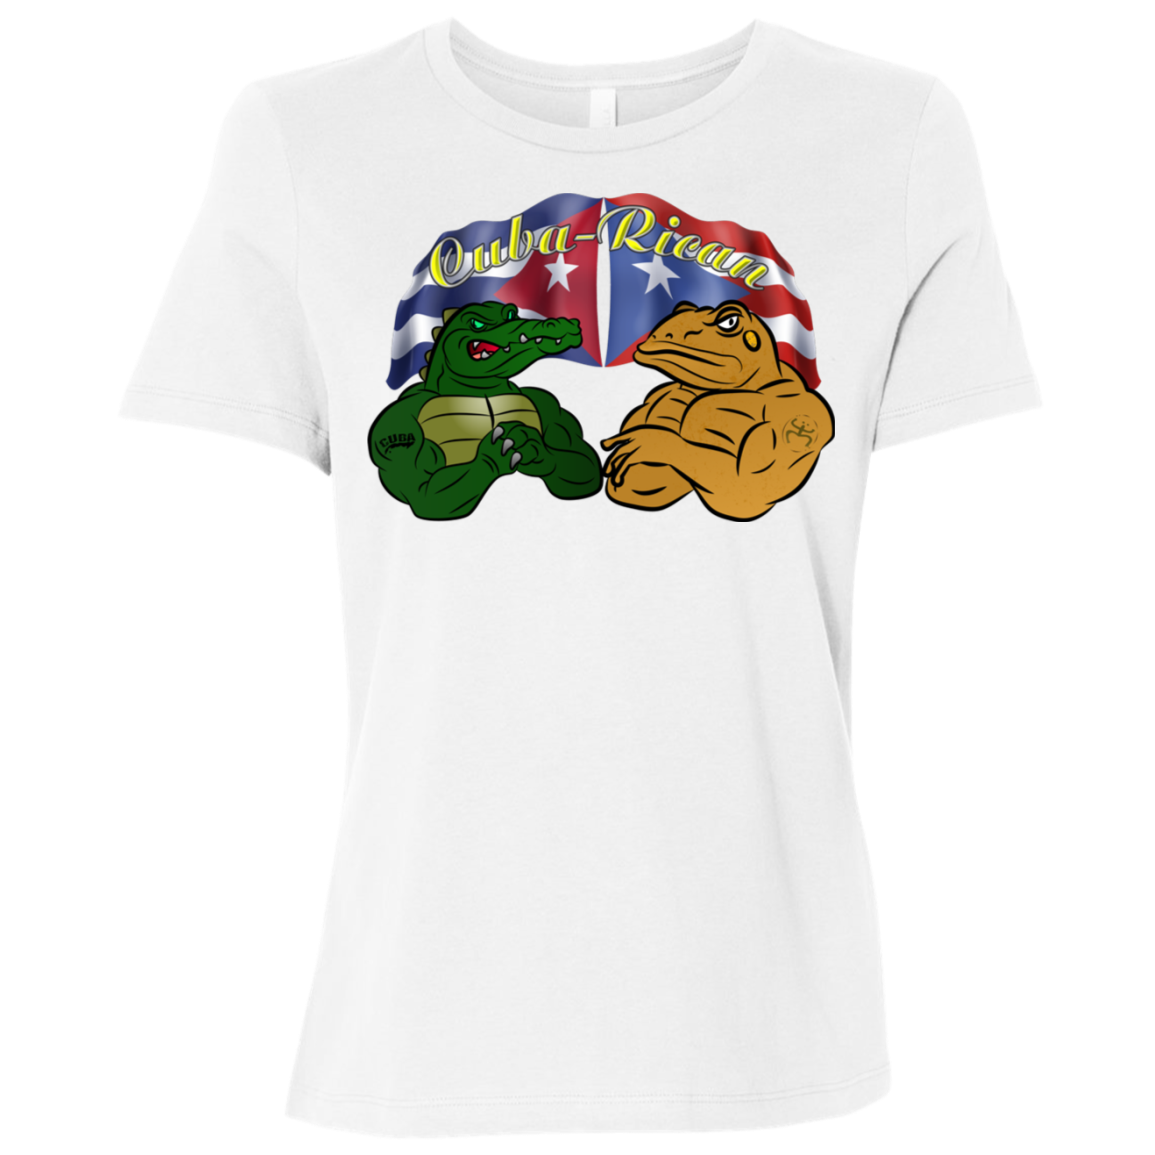 Cuba-Rican Cayman Coqui Ladies' Relaxed Jersey Short-Sleeve T-Shirt - Puerto Rican Pride